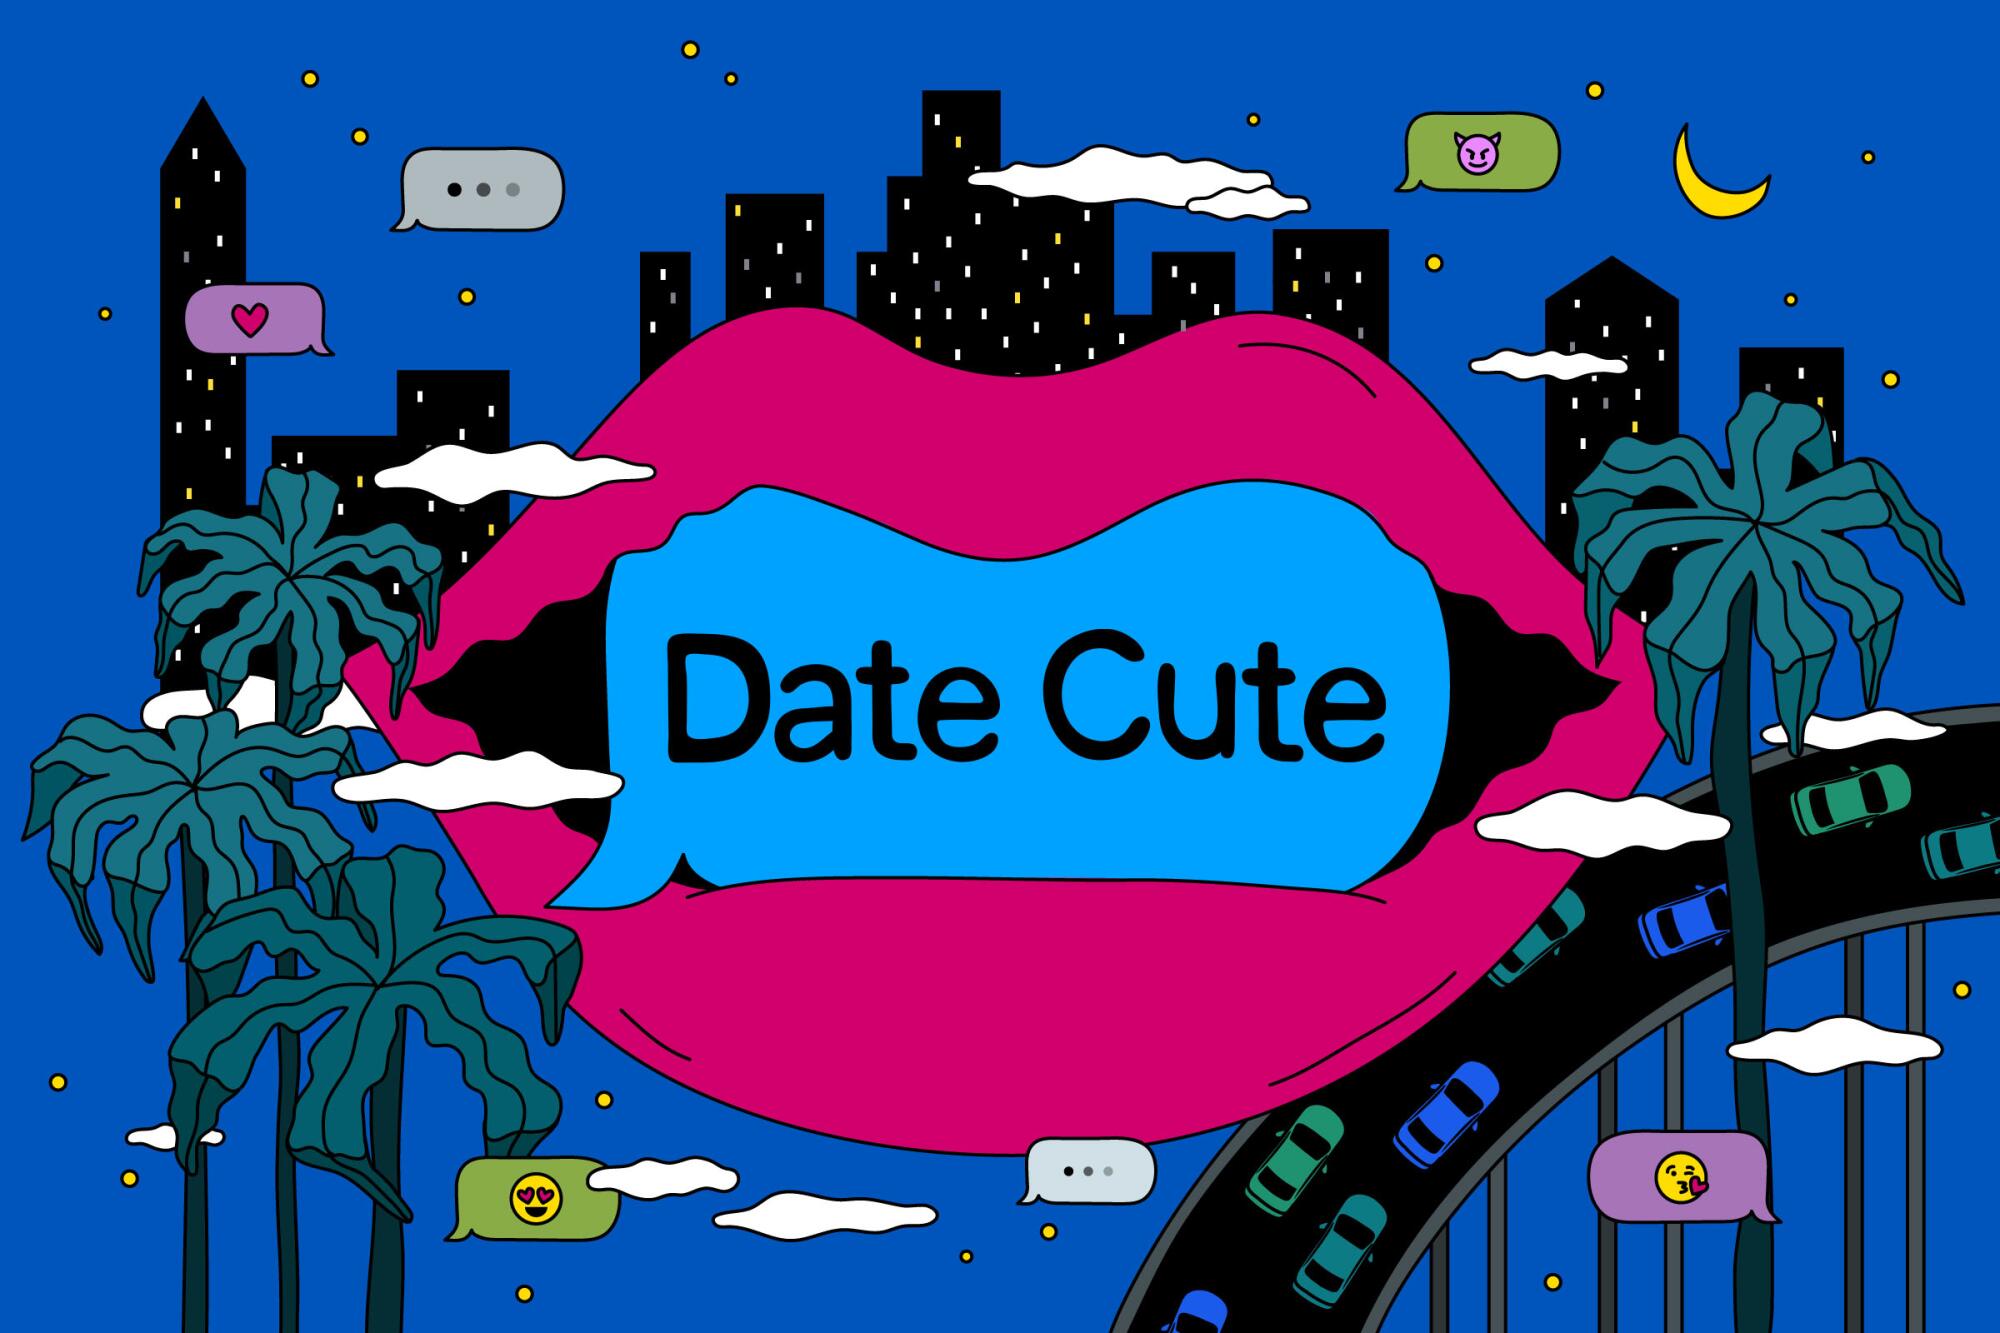 Illo of a city skyline view with text bubbles showing emojis and large pair of lips holding a text bubble saying "date cute"